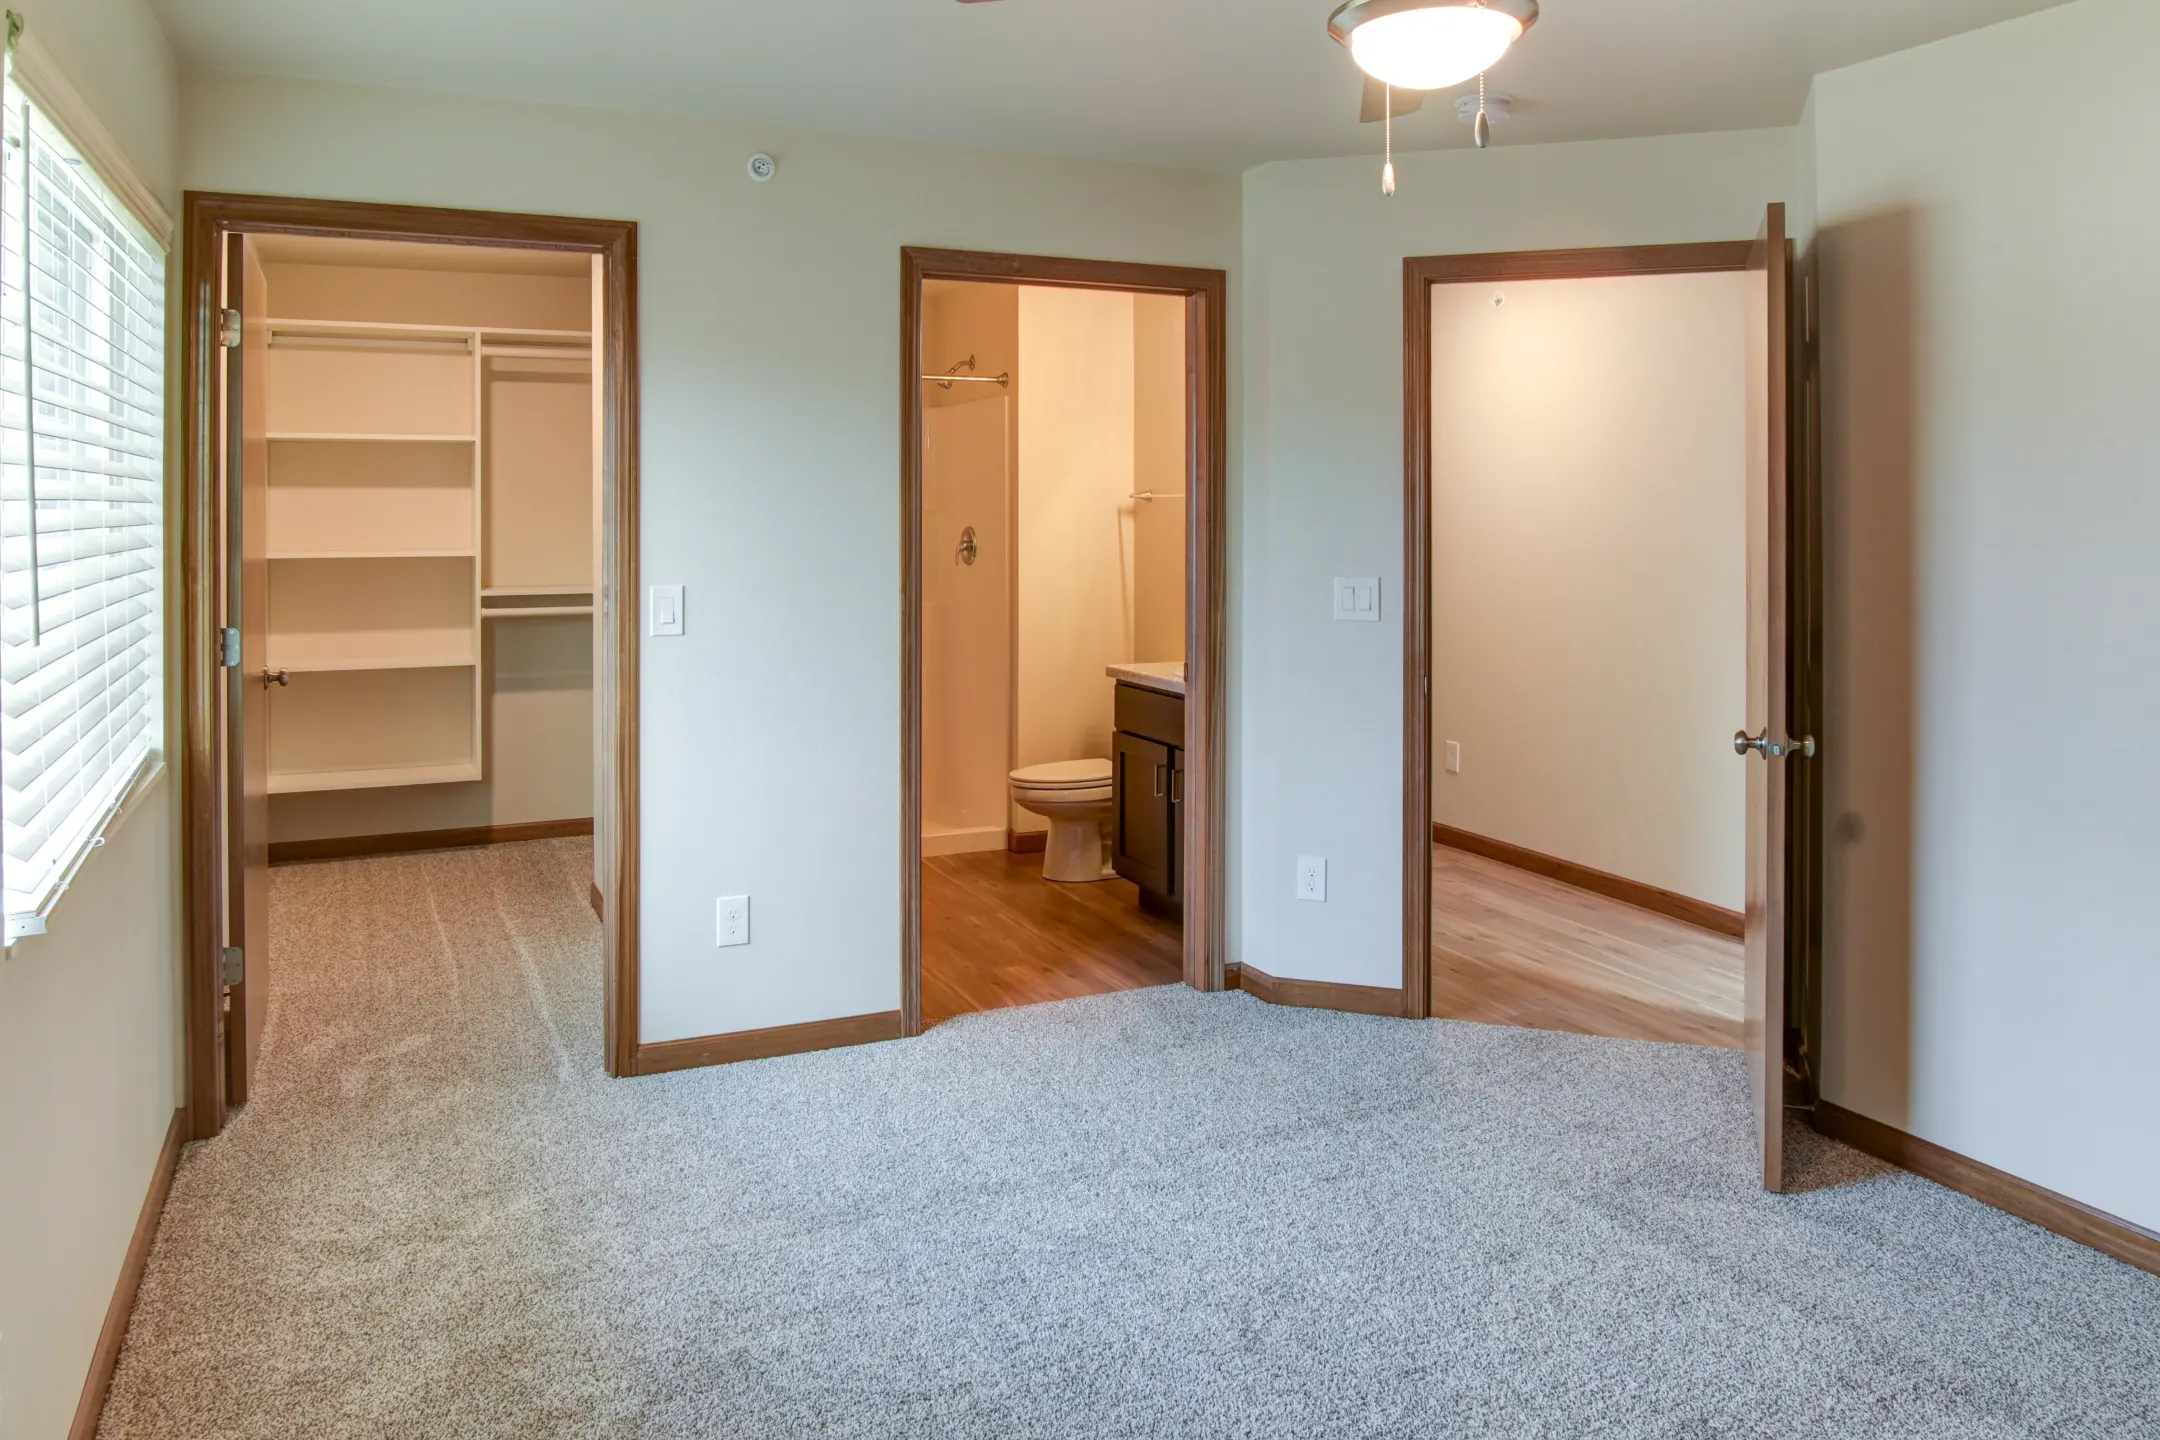 The Shores - 2200 Nicolet Dr | Green Bay, WI Apartments for Rent | Rent.